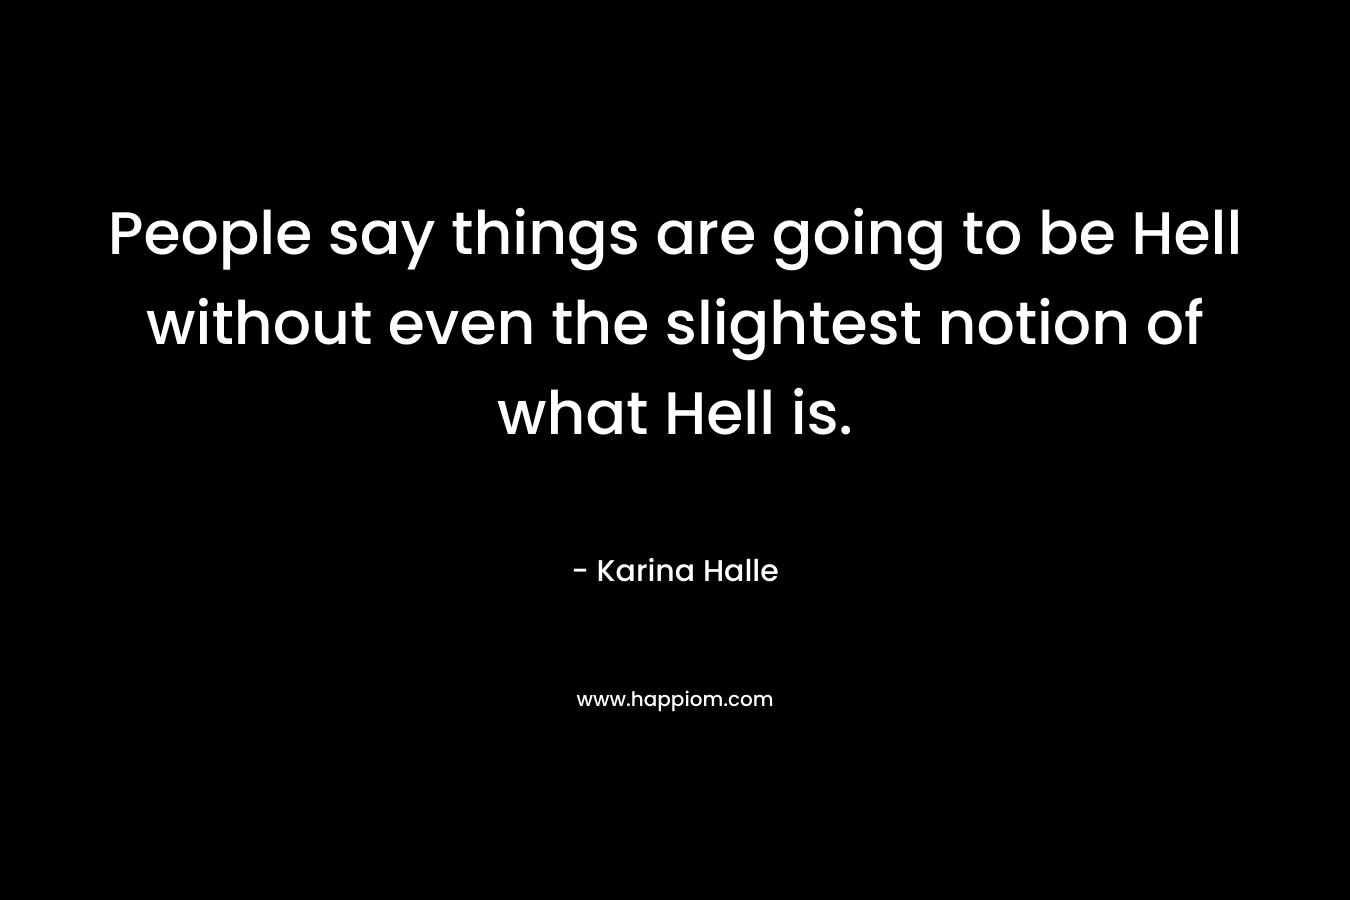 People say things are going to be Hell without even the slightest notion of what Hell is.